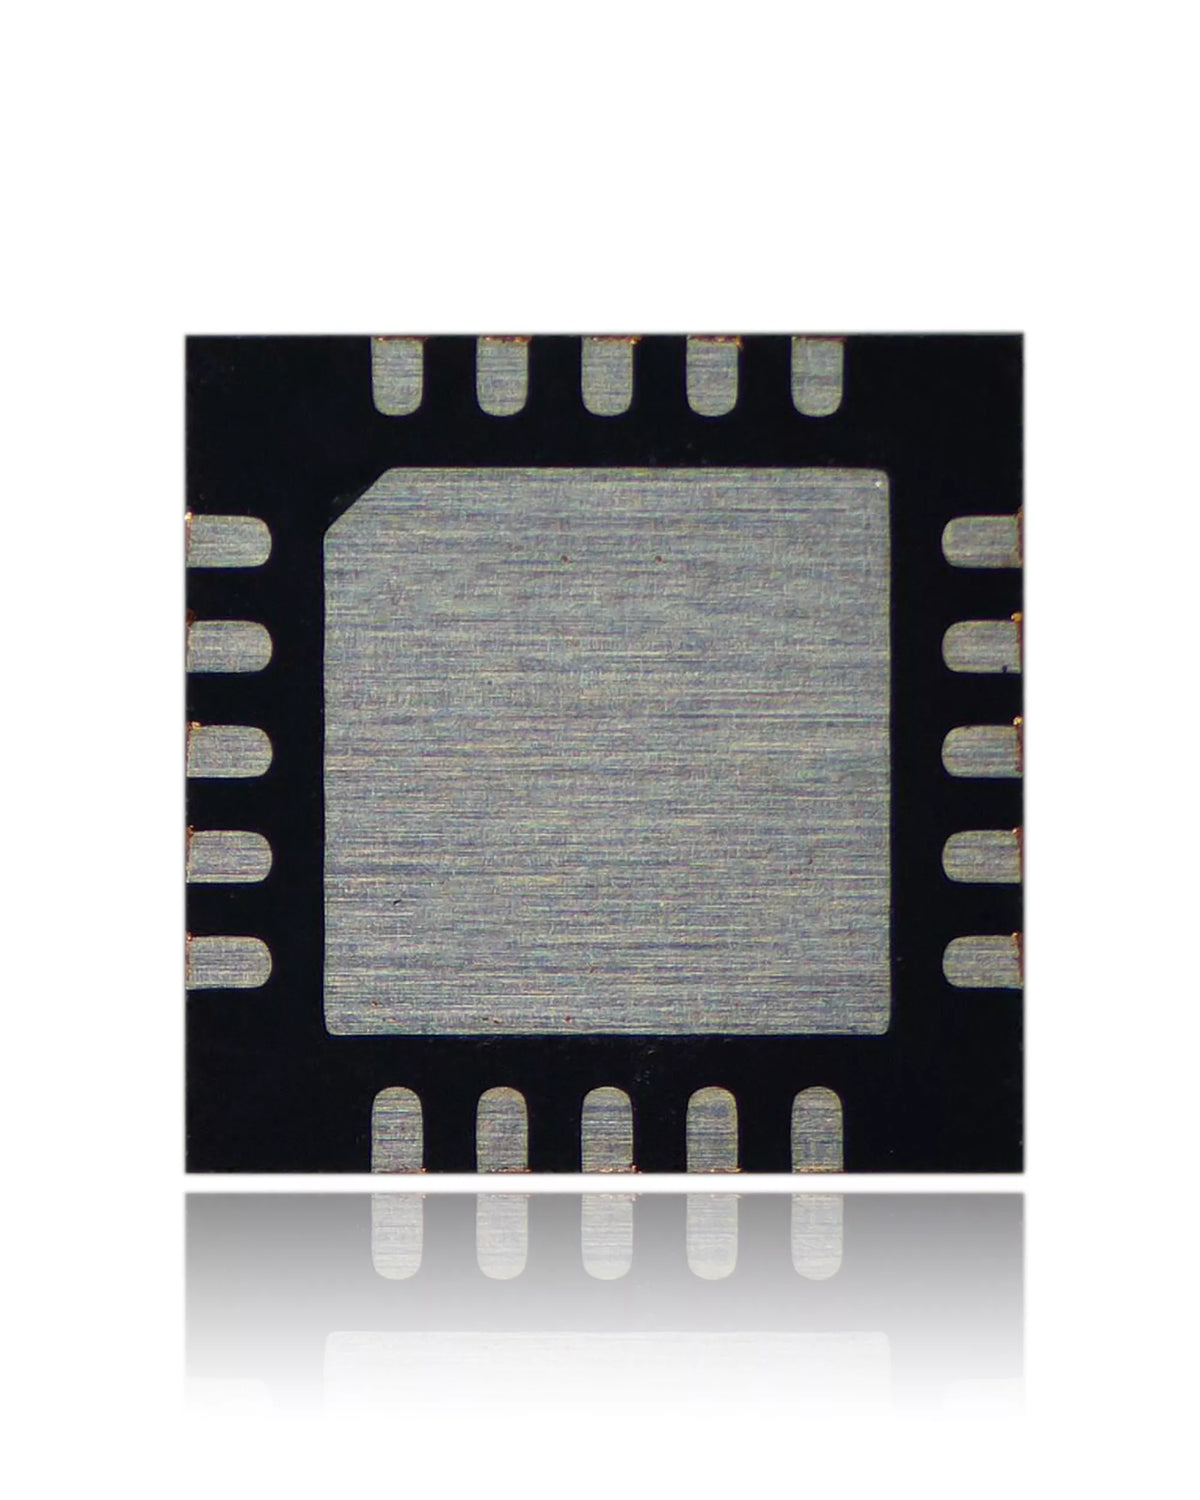 Power IC Chip Compatible For Notebooks / MacBooks (CD3210A0: QFN-20Pin)